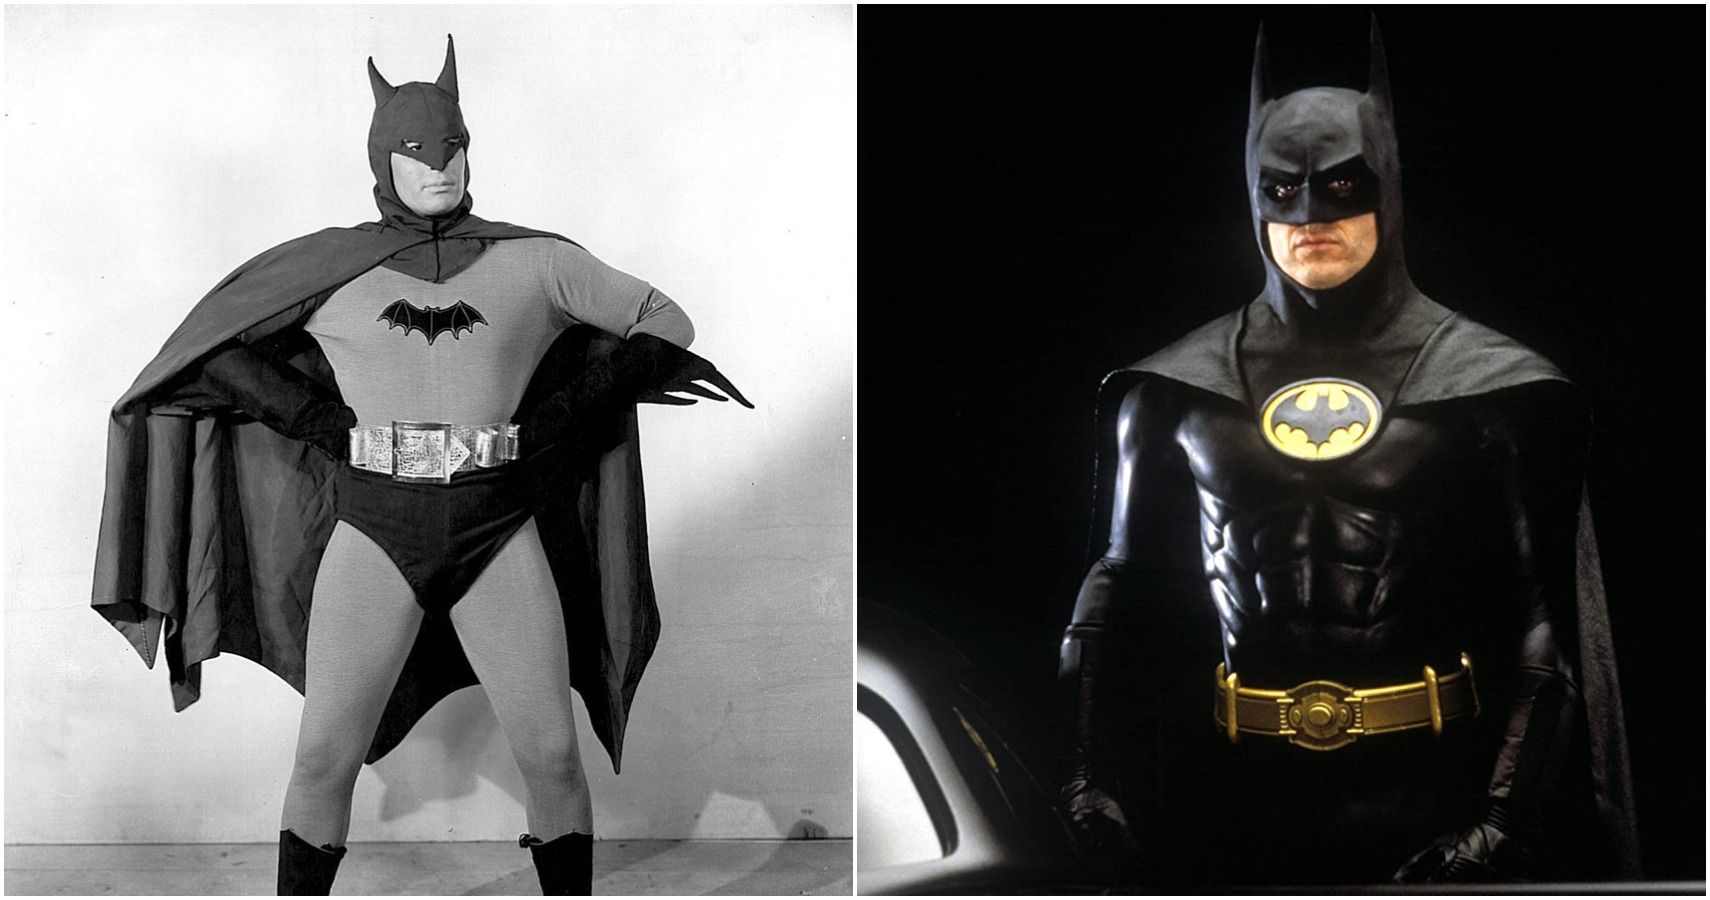 Batman: Every Costume From The Movies, Ranked From Worst To Best